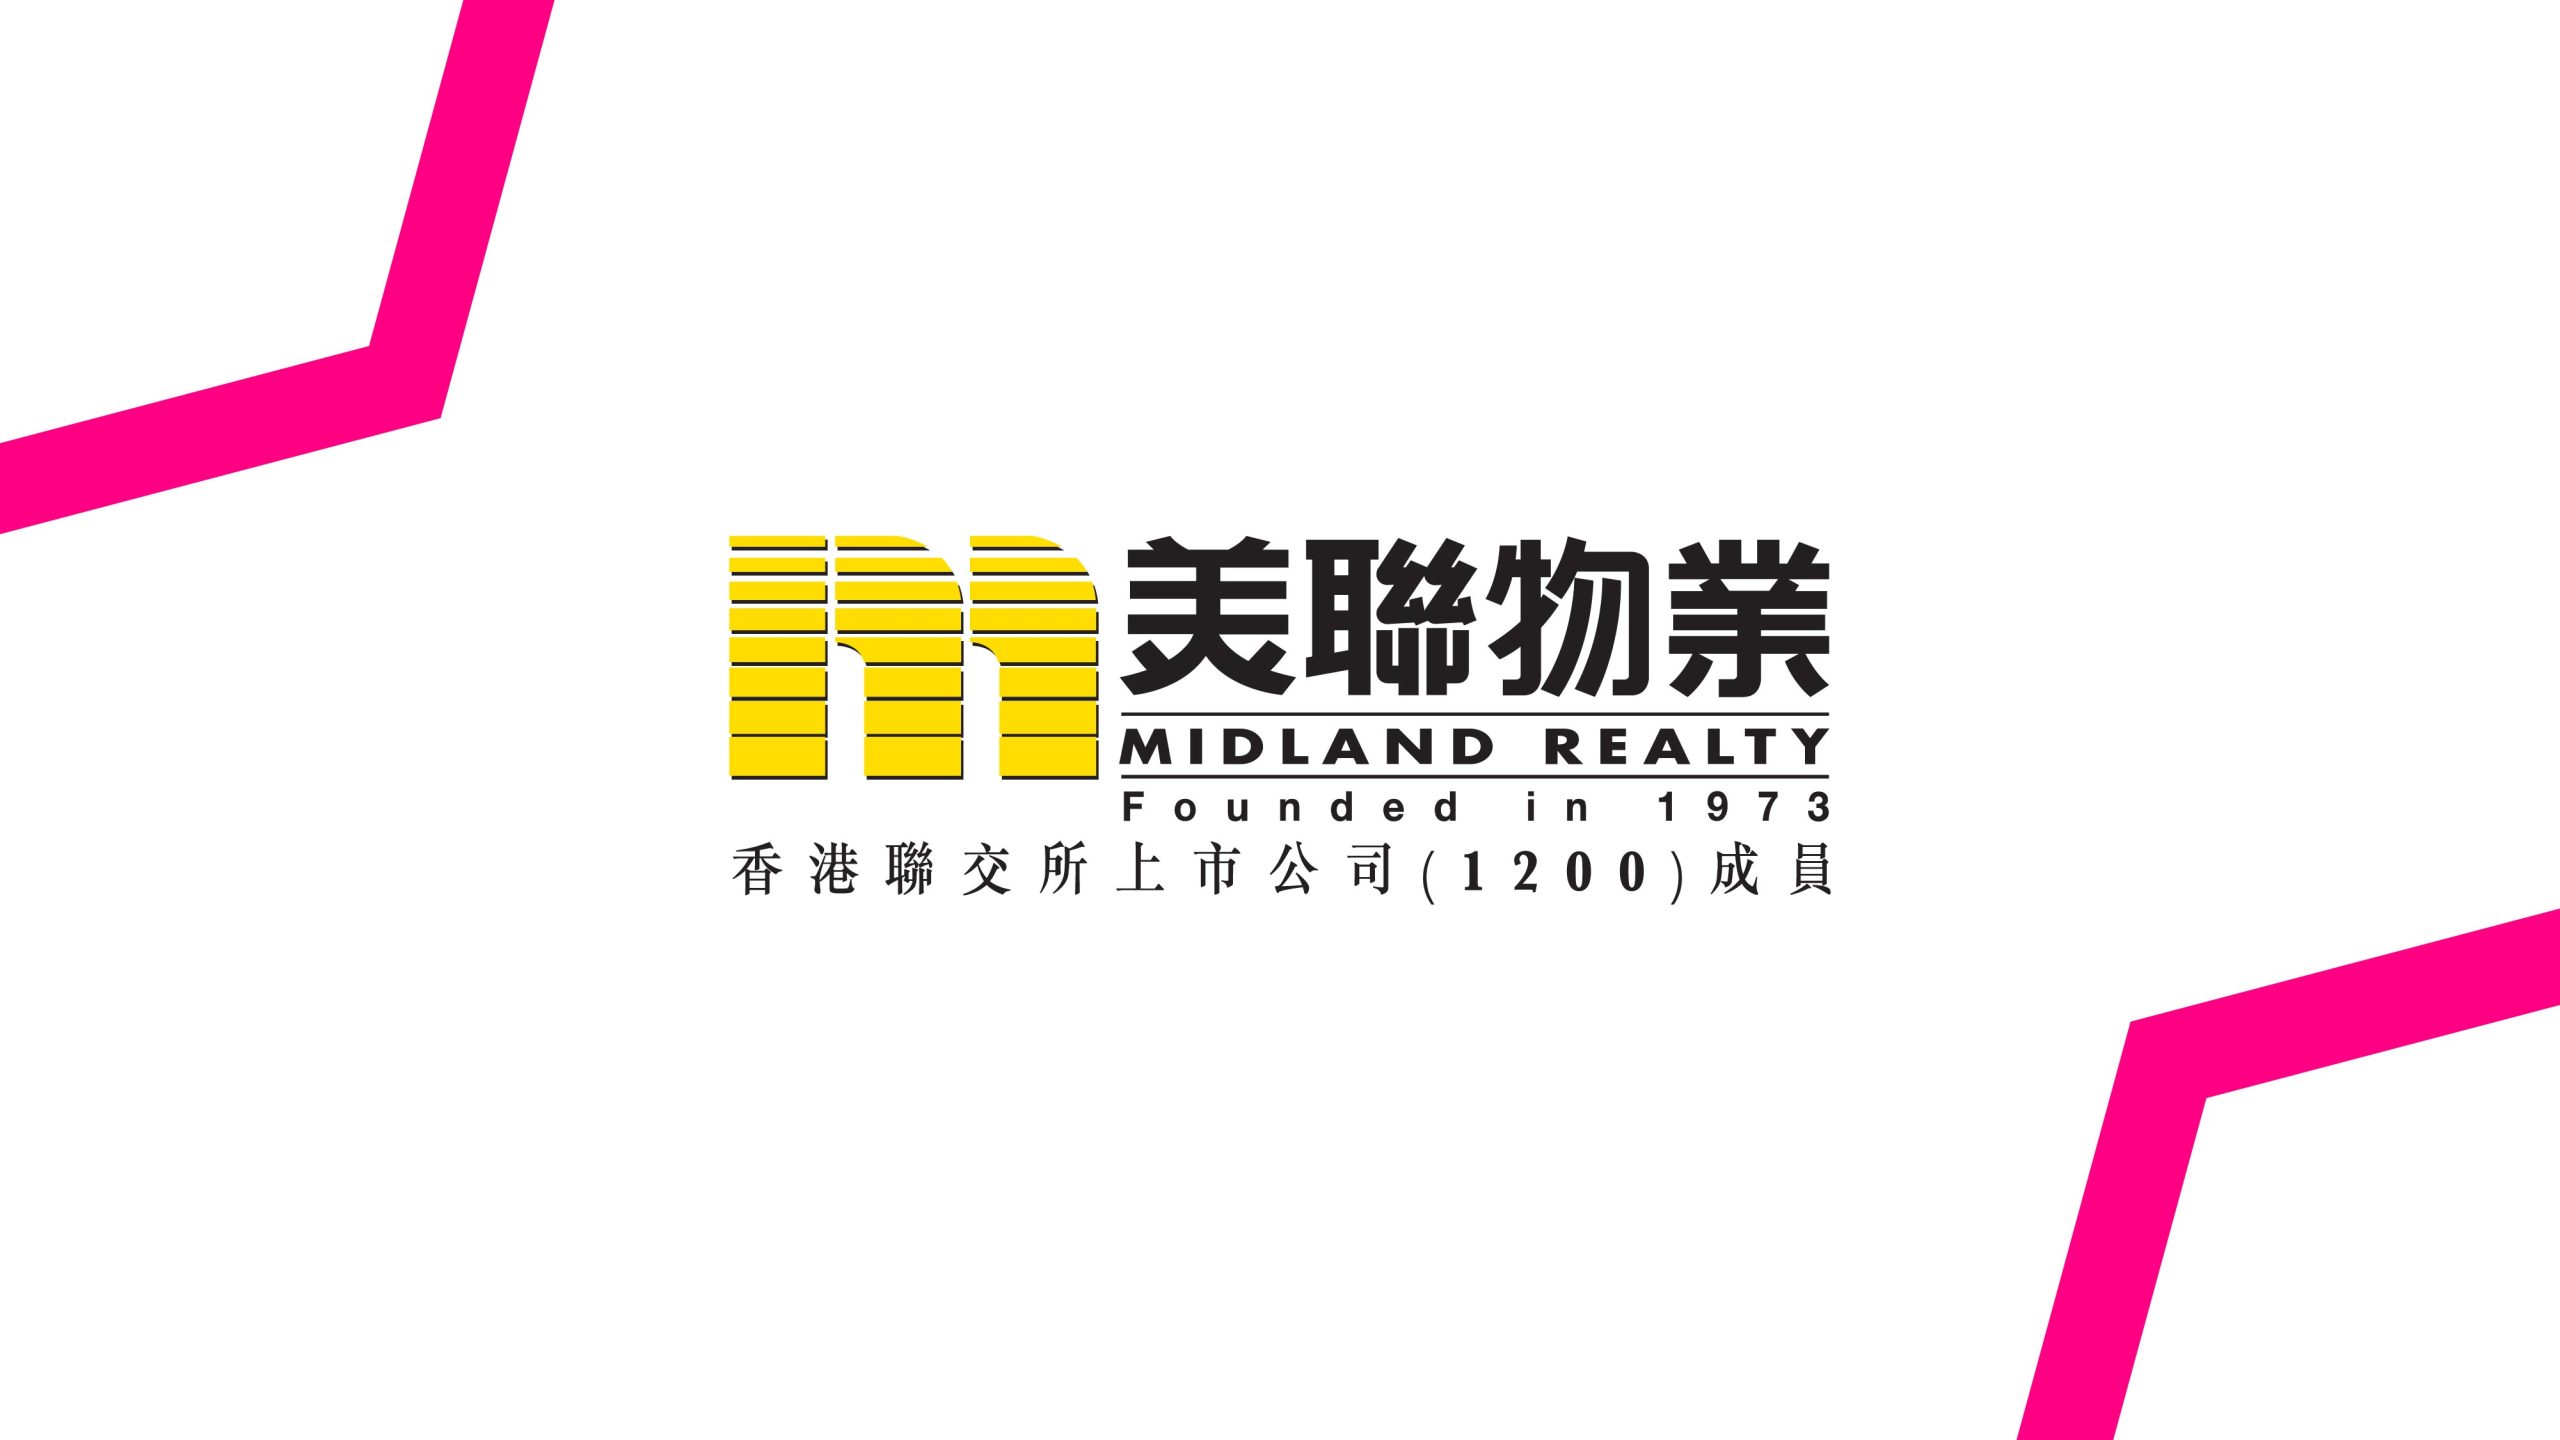 Strategic supply partnership is announced with Midland Realty, exclusive media owner in the Real Estate sector across North Asia